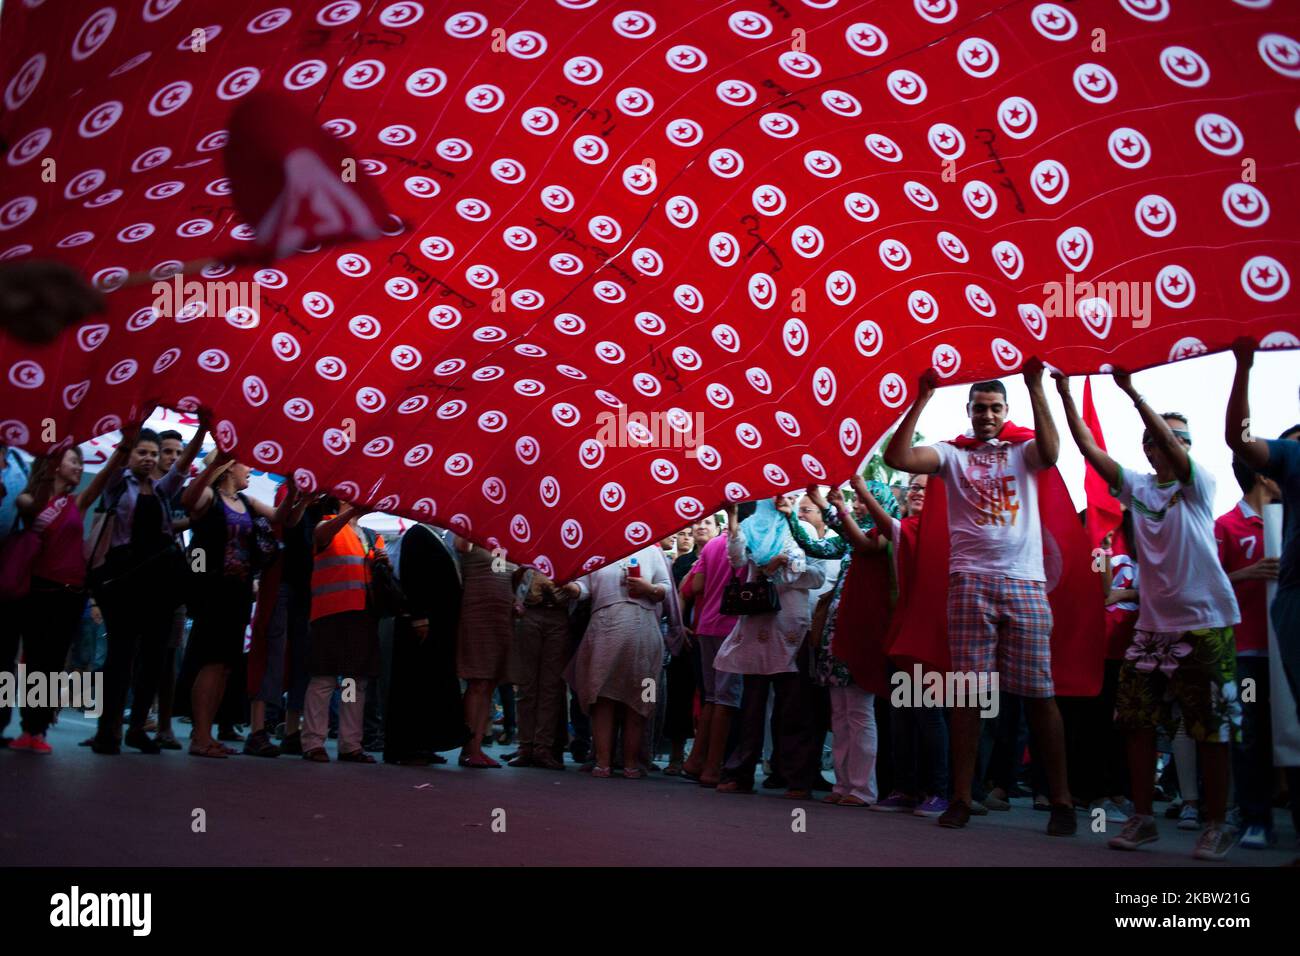 People wave a big tunisien flag during a march outside the National Assembly at the bardo to mark the 40th day since the assassination of opposition politician Mohamed Brahmi. Brahmi was shot dead by unknown gunmen outside his home. On 7 September 2013, in Tunis, Tunisia. (Photo by Emeric Fohlen/NurPhoto) Stock Photo